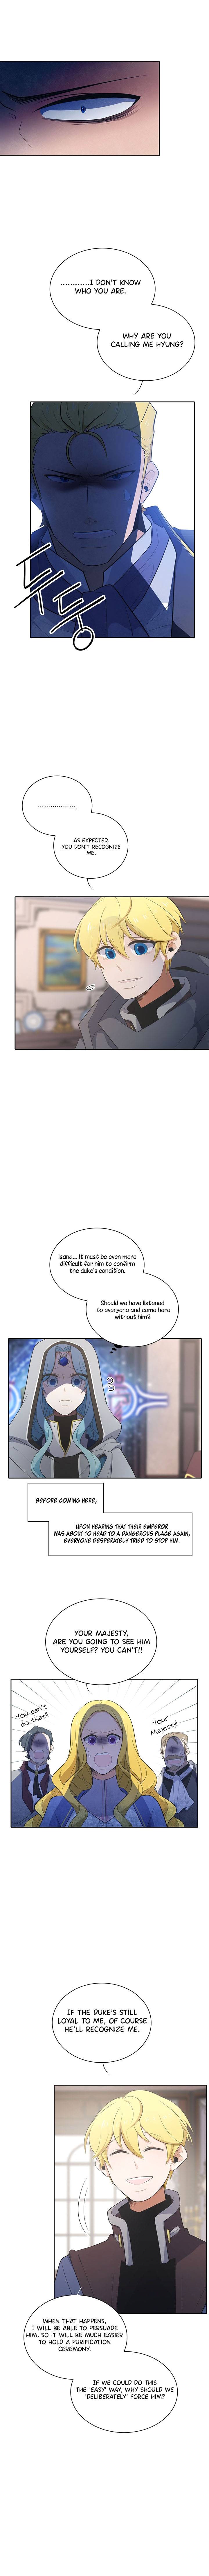 Elqueeness - Page 4